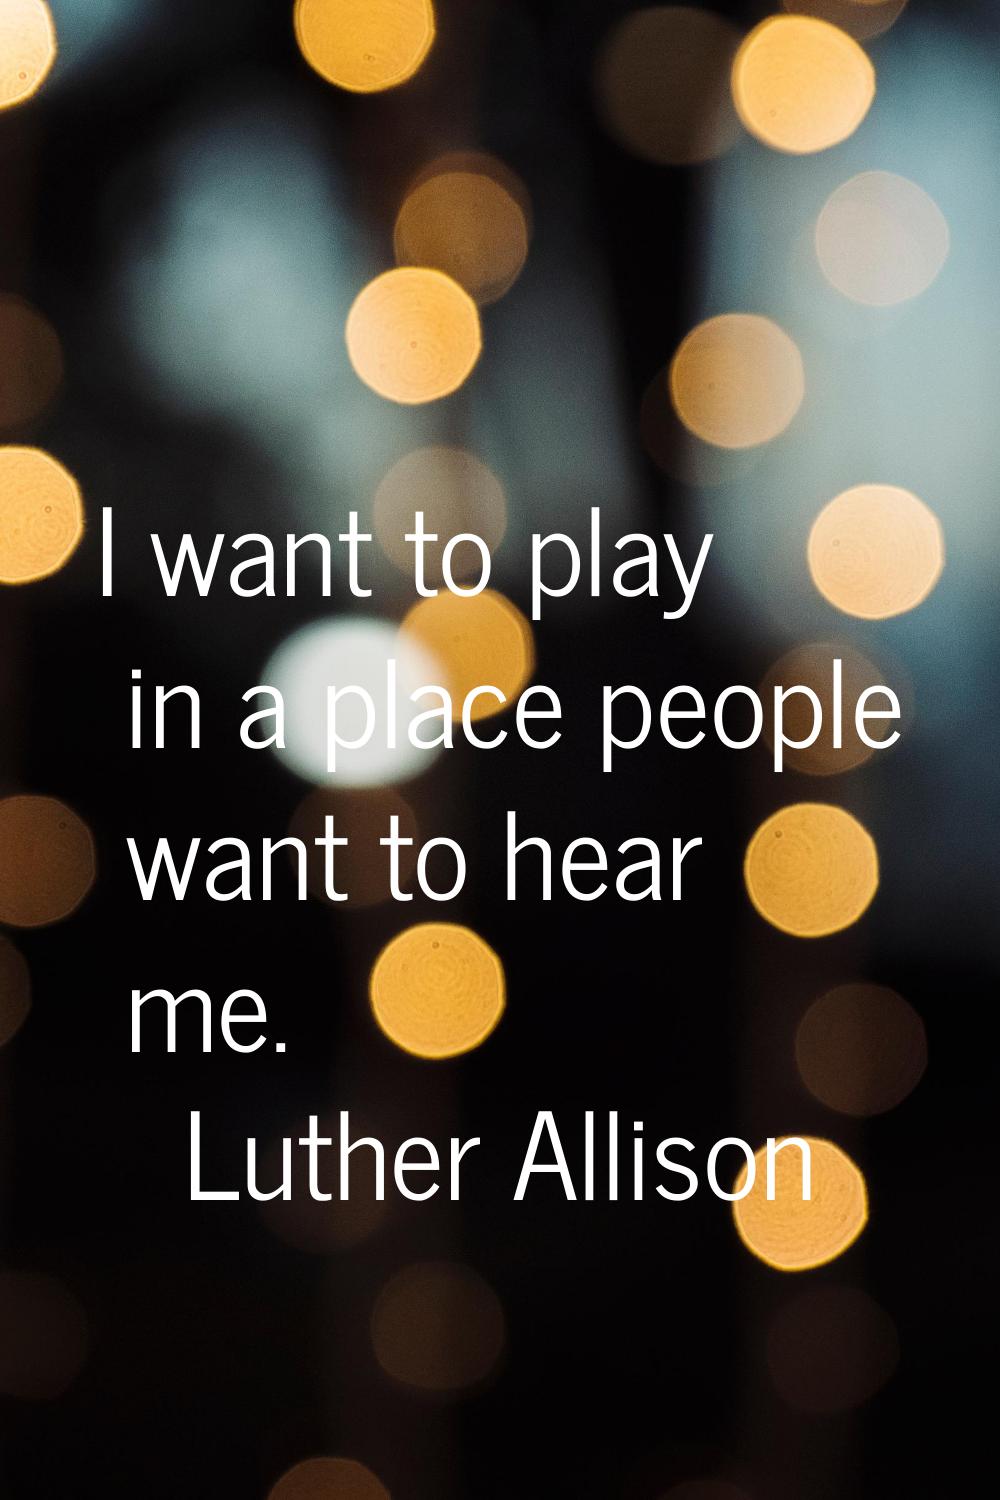 I want to play in a place people want to hear me.